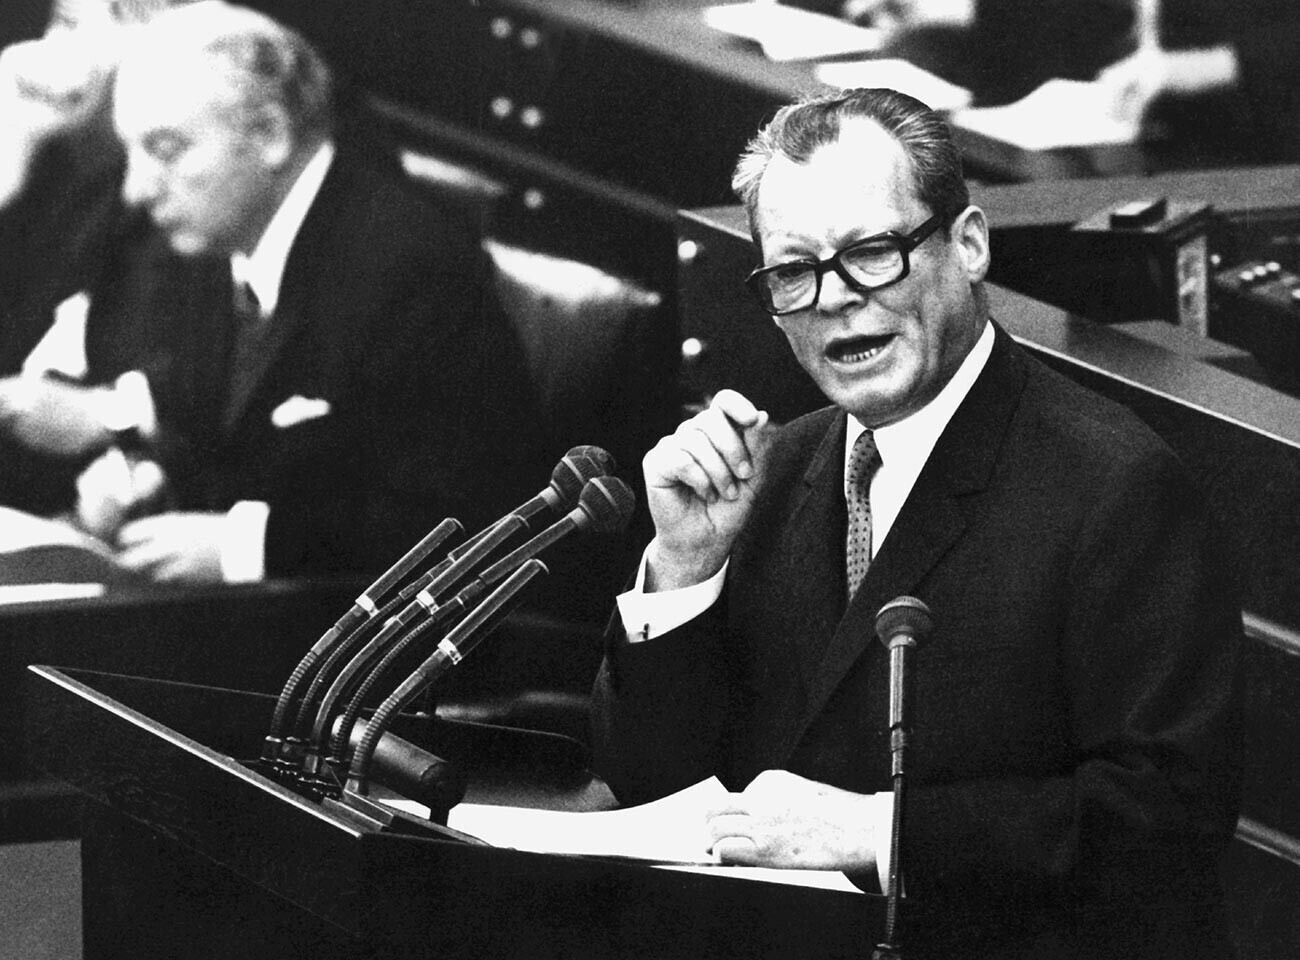 Chancellor Willy Brandt gives a governmental statement in the German Bundestag in Bonn on the 28th of September in 1969.